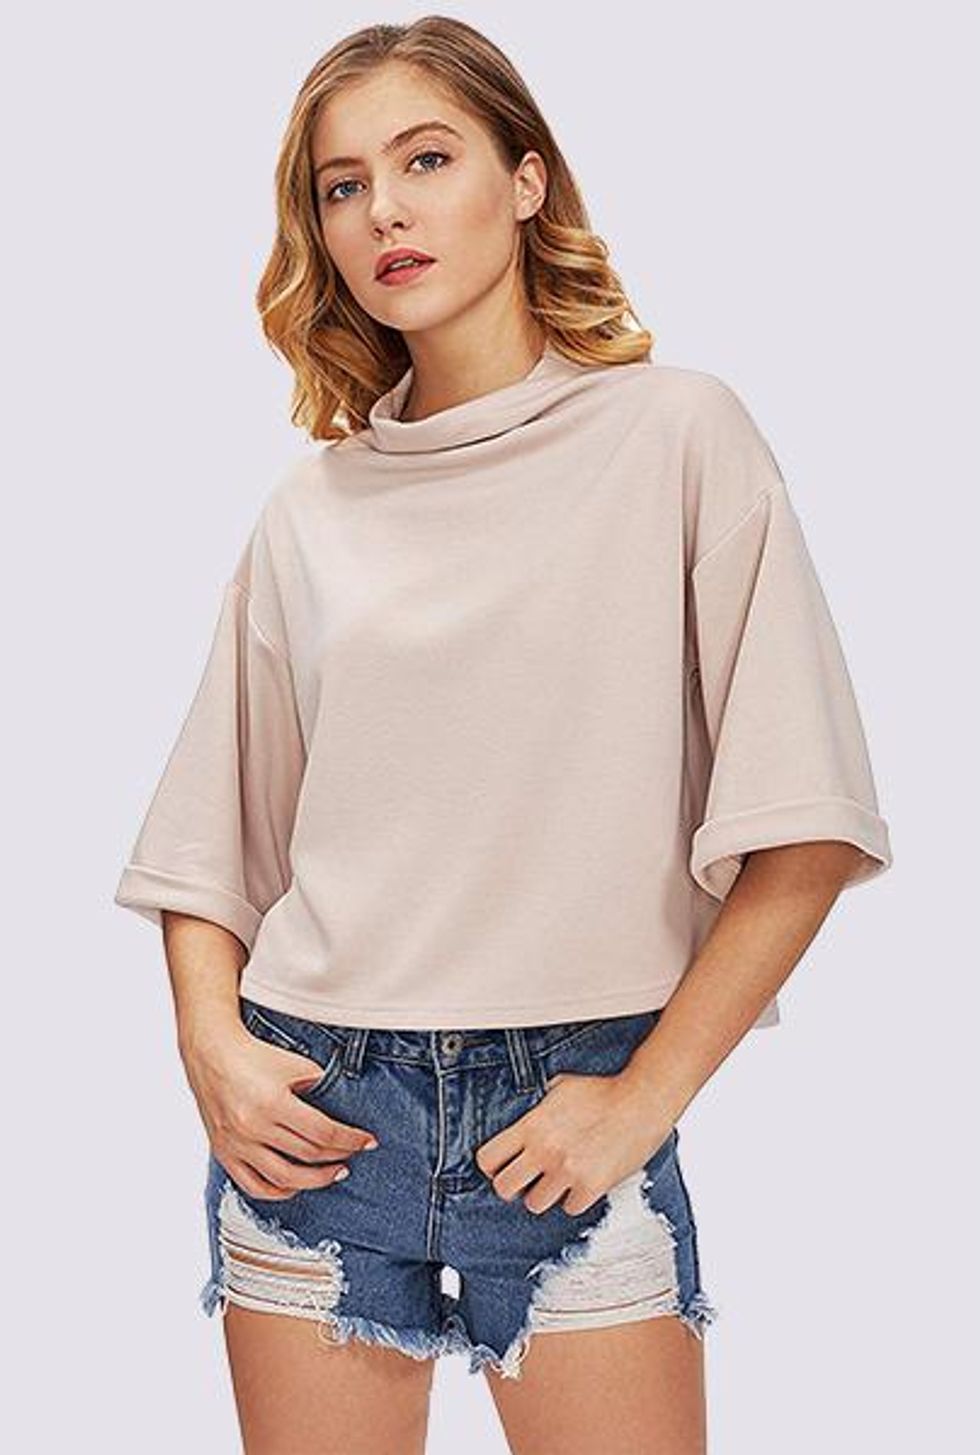 37 Cute And Affordable  Clothing Items Under $20 Gallery - 22 Words